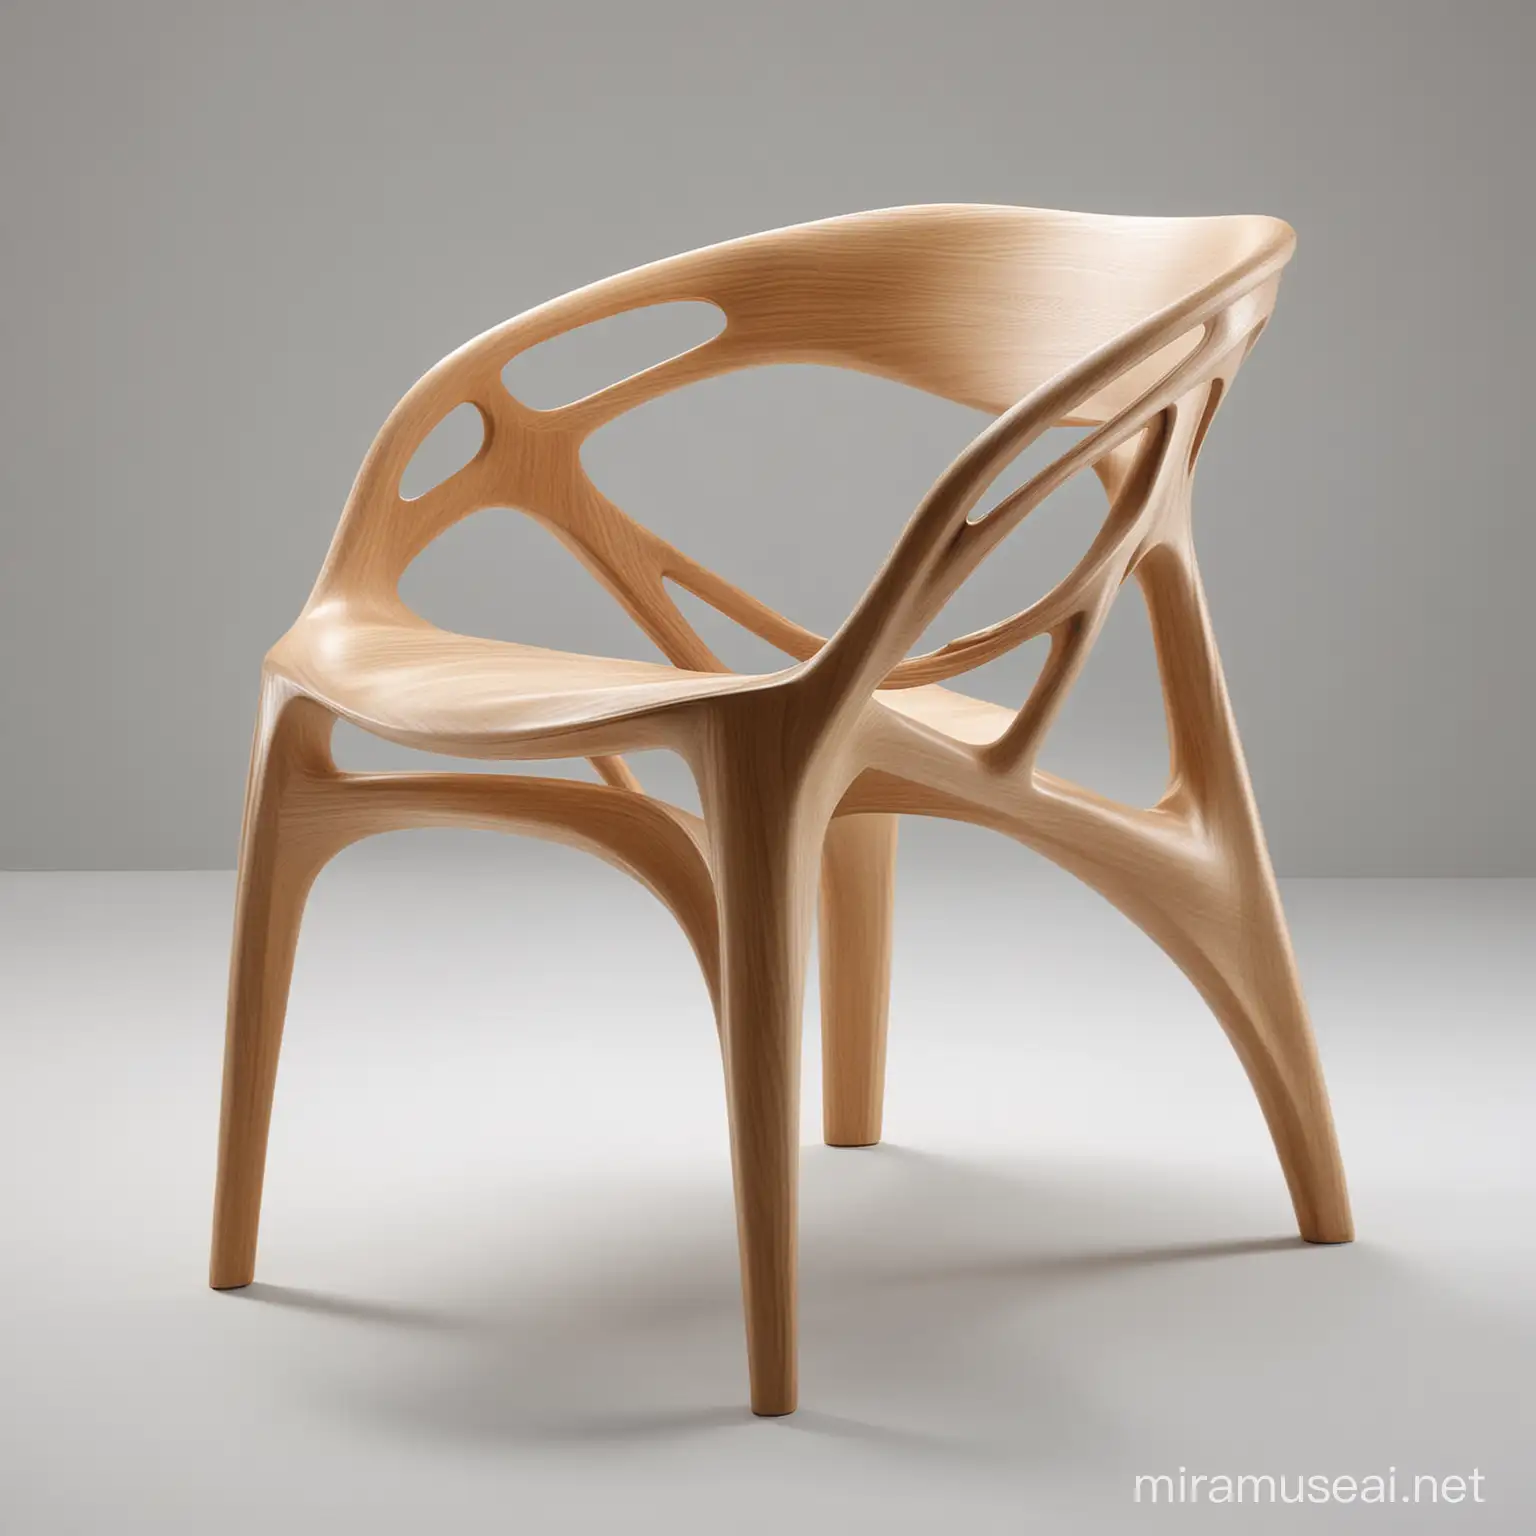 Zaha Hadid Inspired Futuristic Wooden Armchair for Product Design